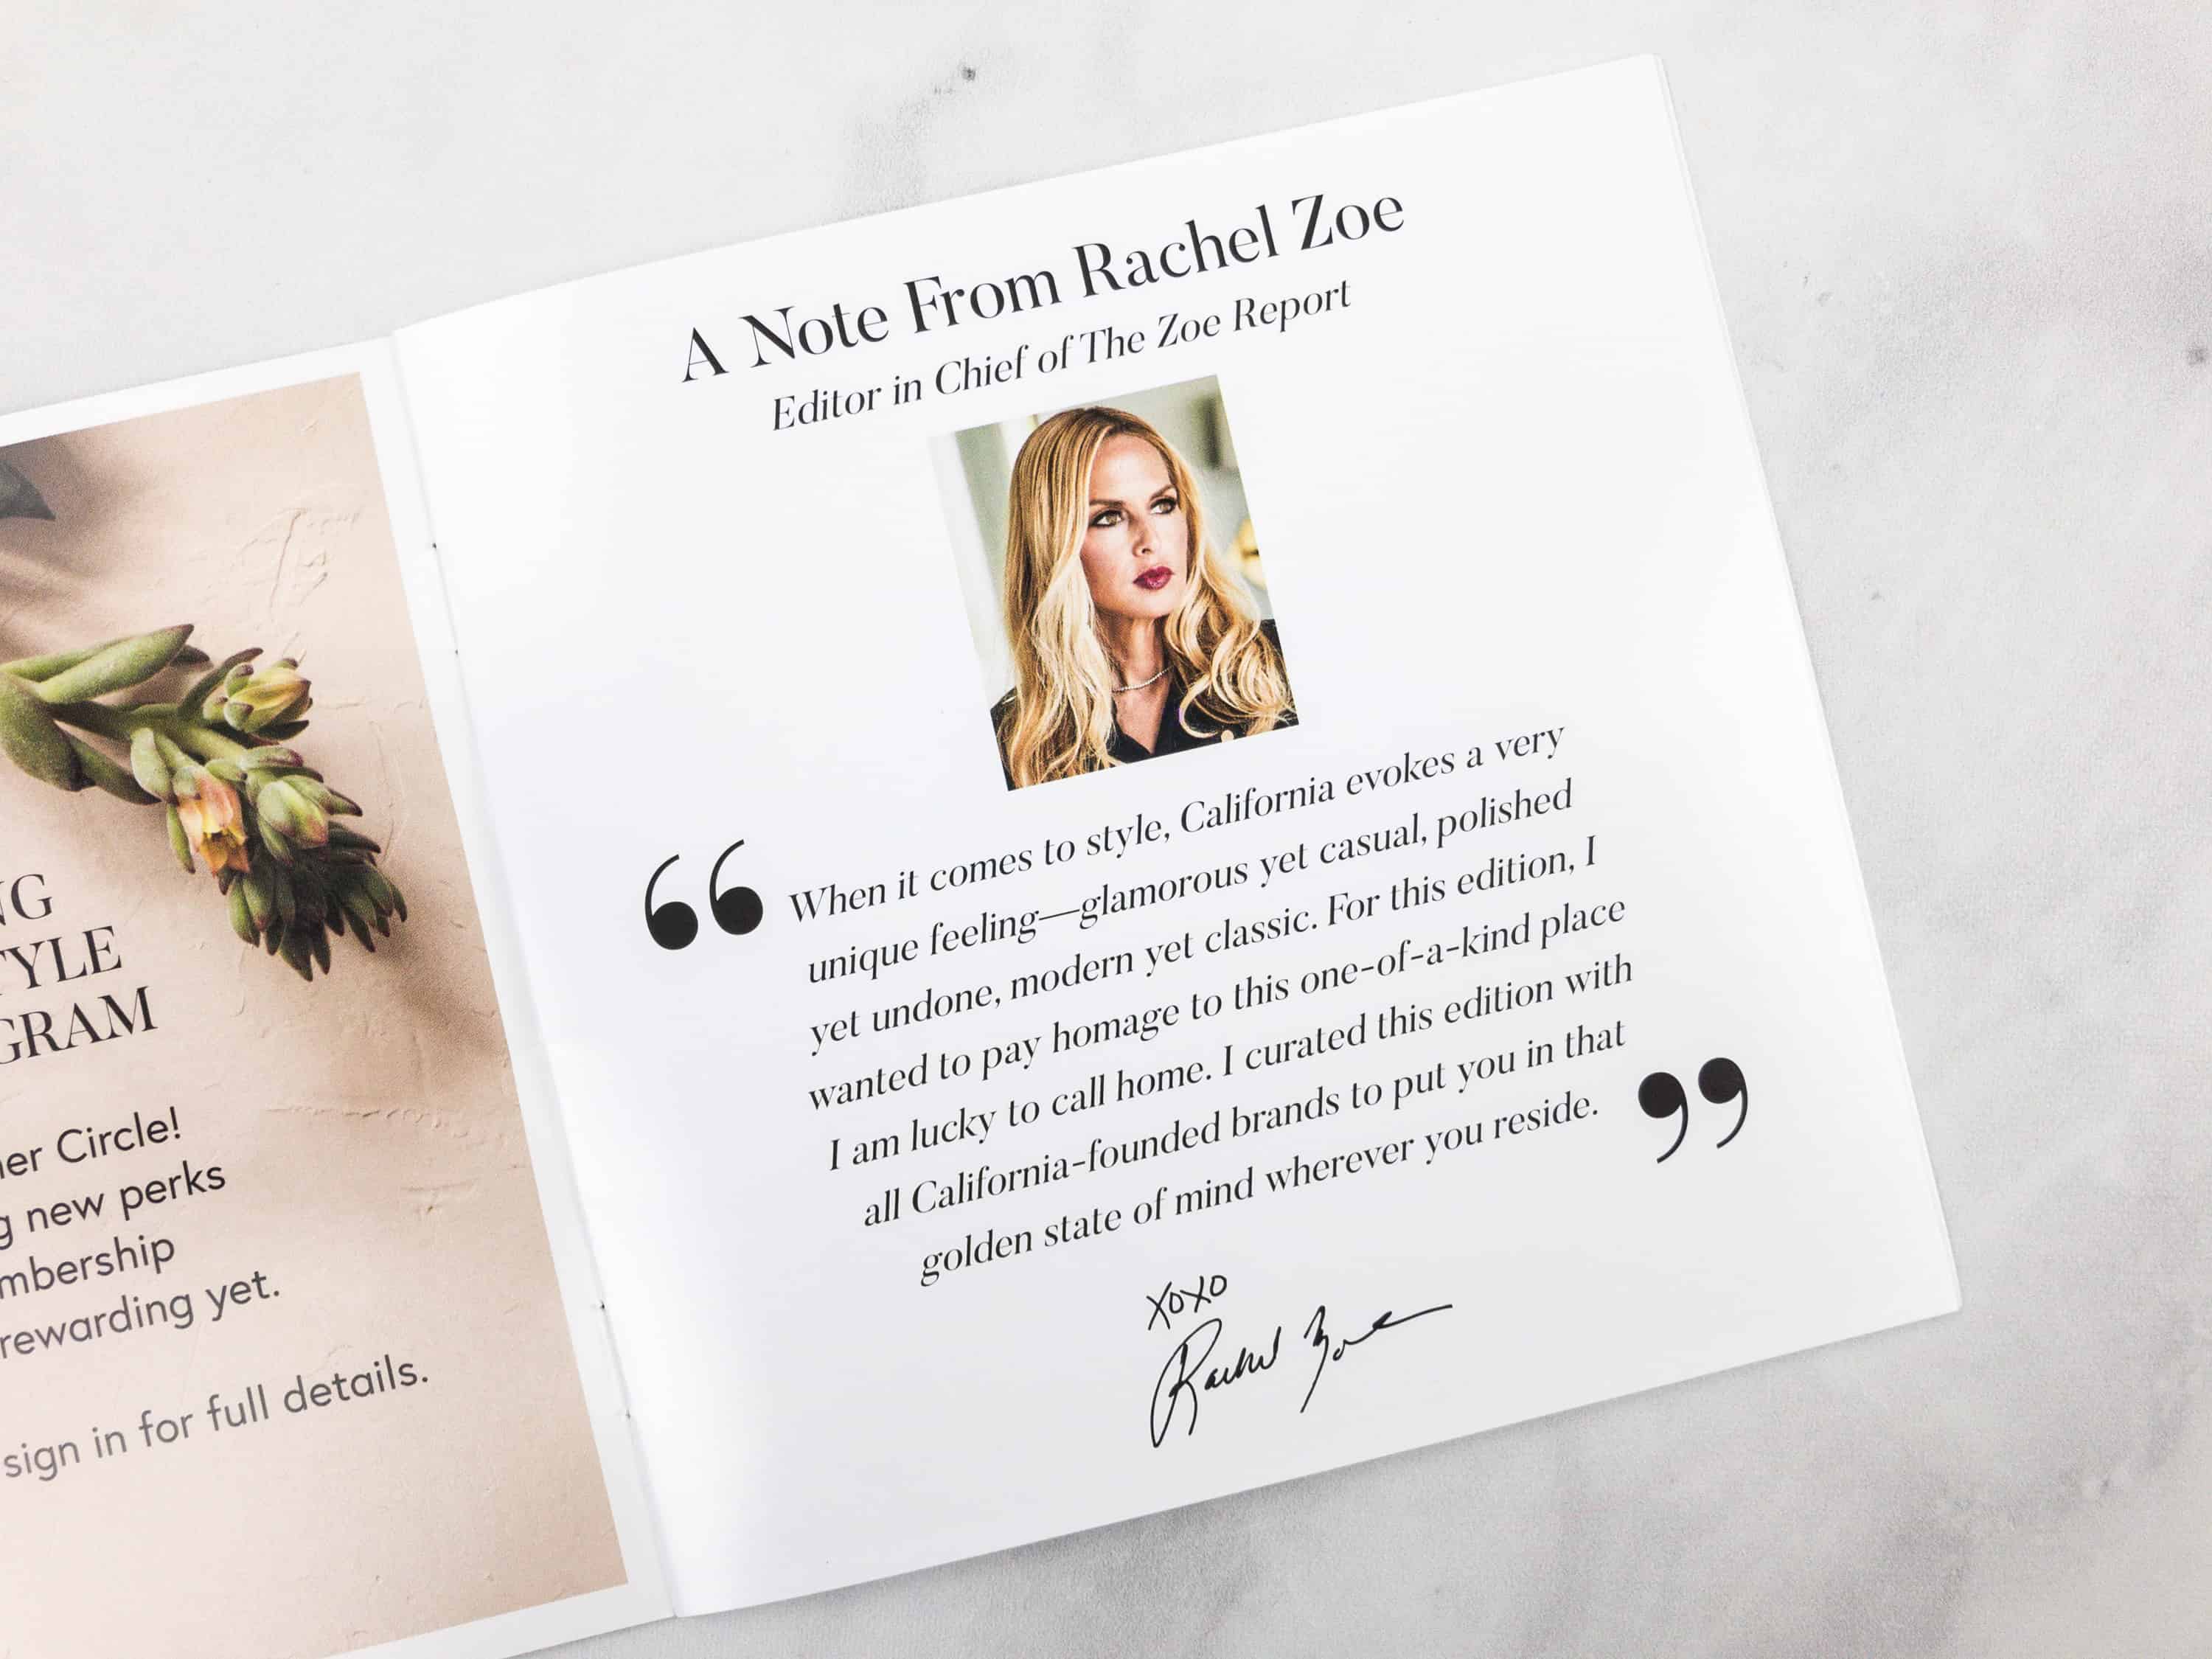 Rachel Zoe Box of Style Fall Box Review - Have Need Want